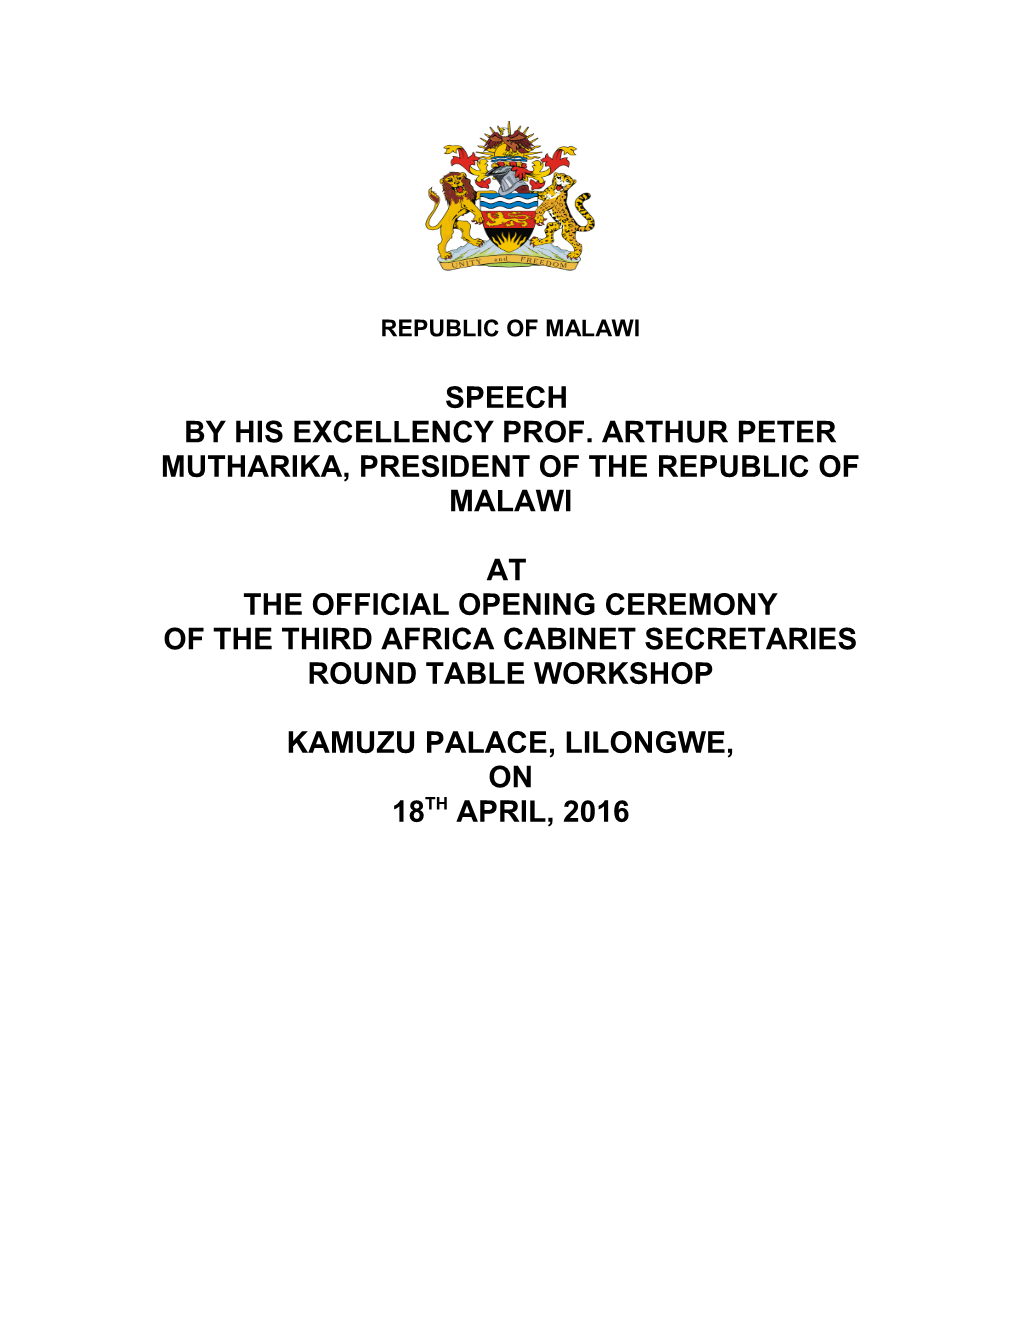 By His Excellency Prof. Arthur Peter Mutharika, President of the Republic of Malawi